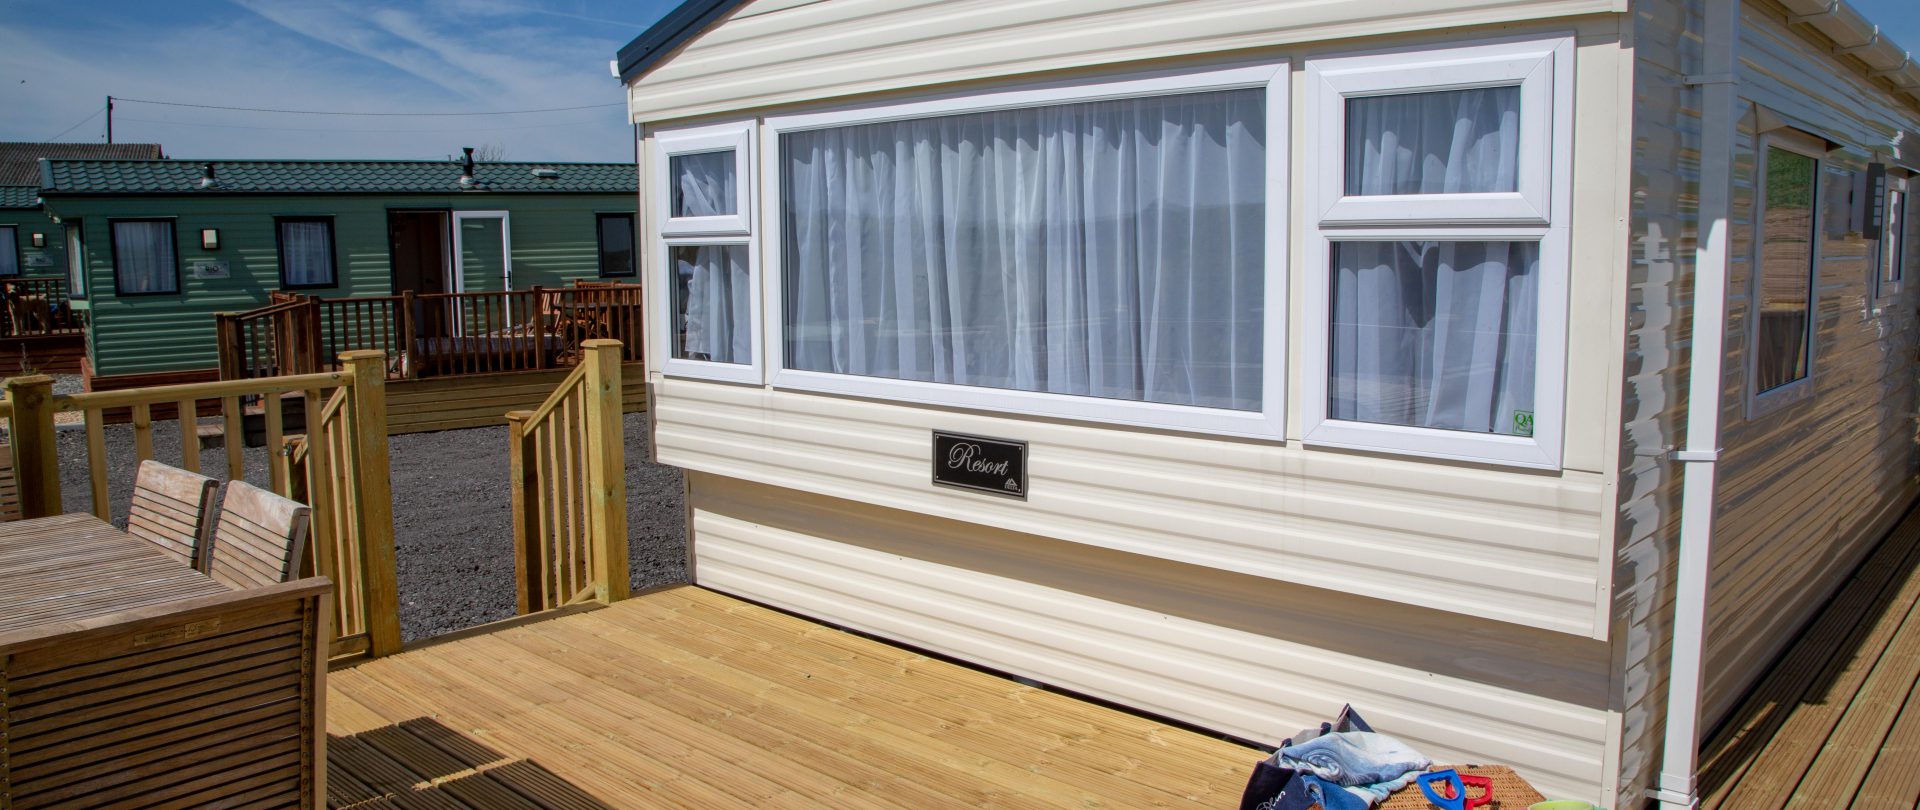 Static Caravans to Hire at The Oaks Holiday Park, Looe South Cornwall